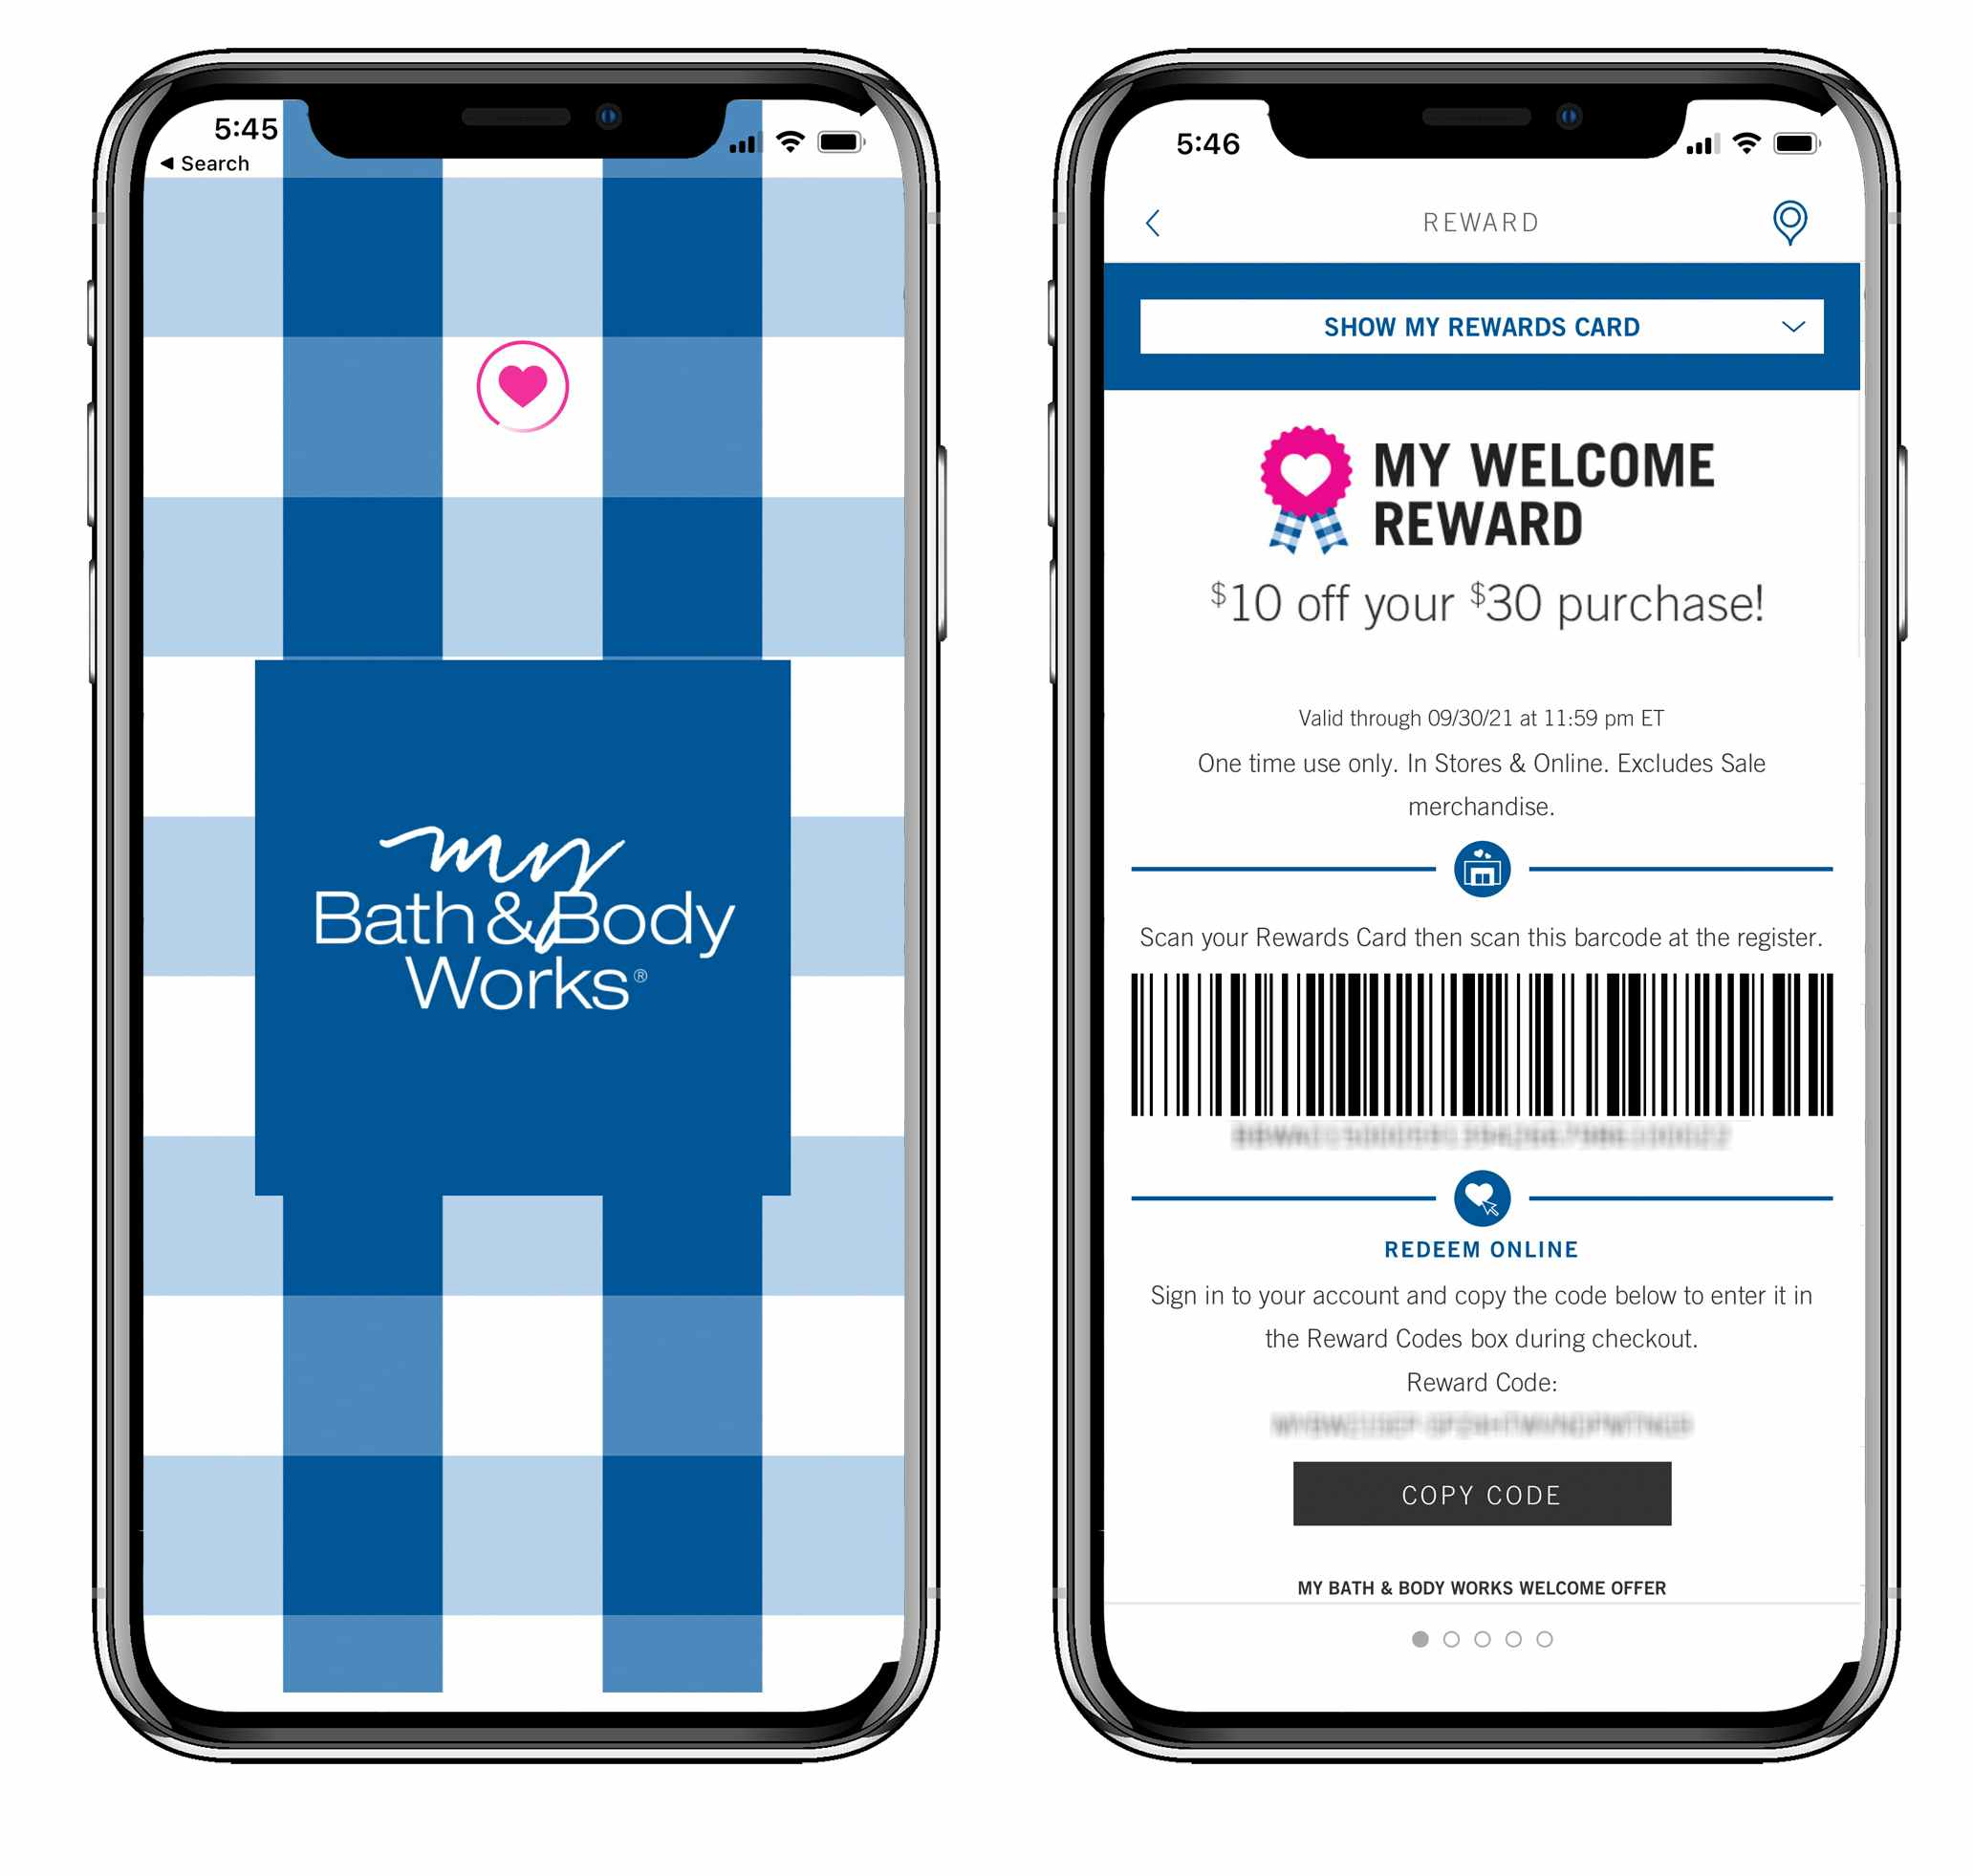 A graphic of two iPhones, one showing the My Bath & Body Works app start screen and the other showing a welcome reward coupon for $10 off $30 in the app.